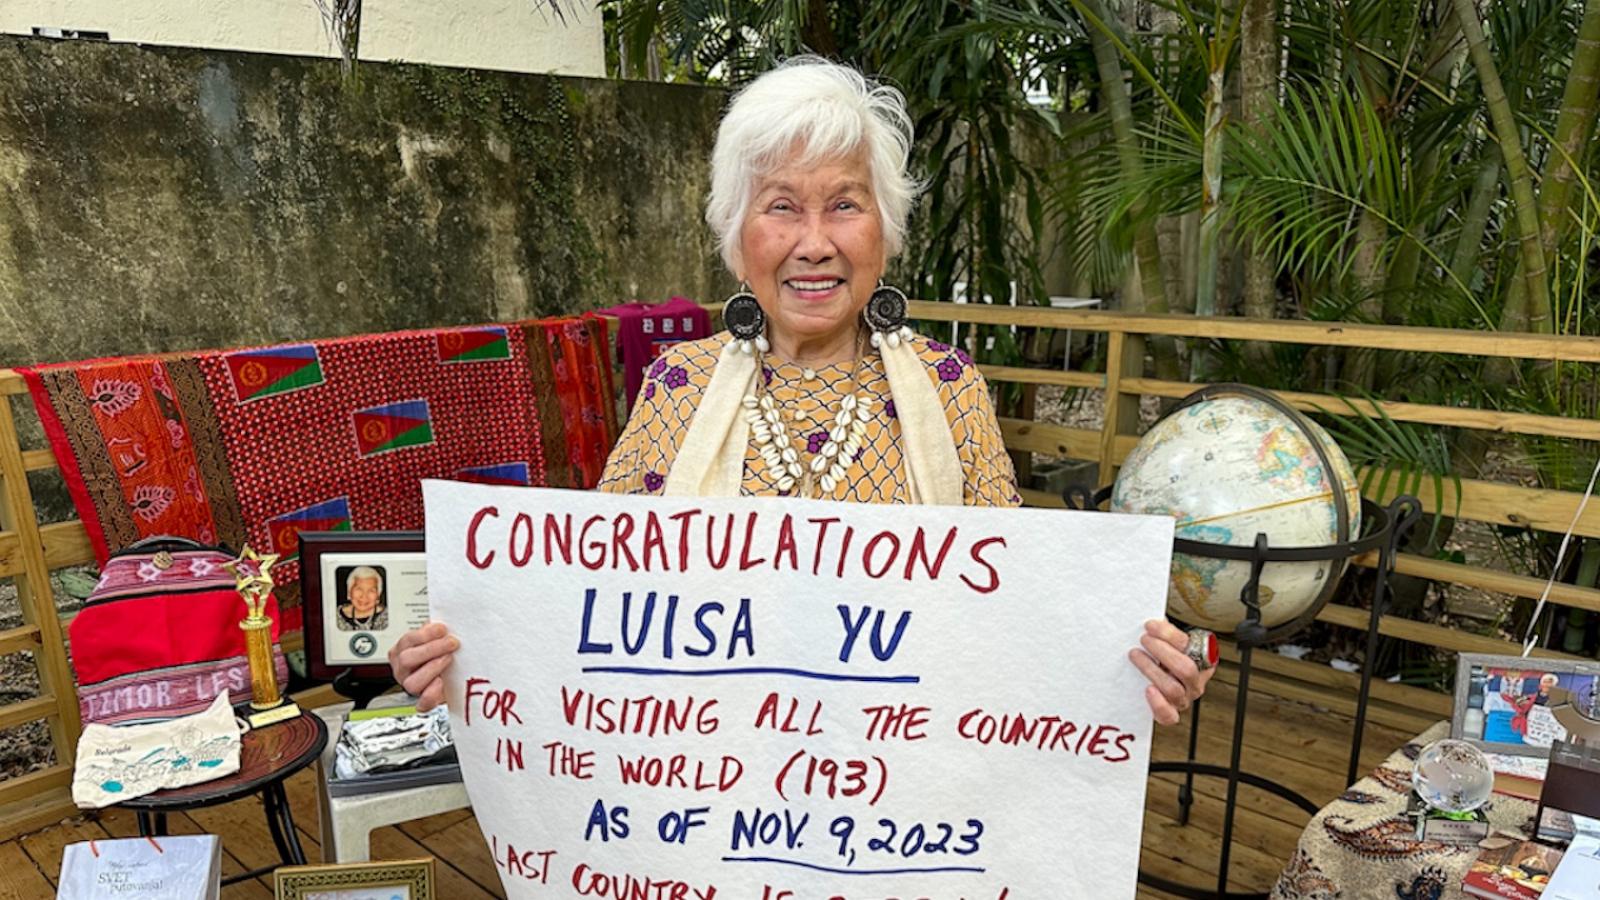 VIDEO: Meet the 79-year-old woman who traveled to every country